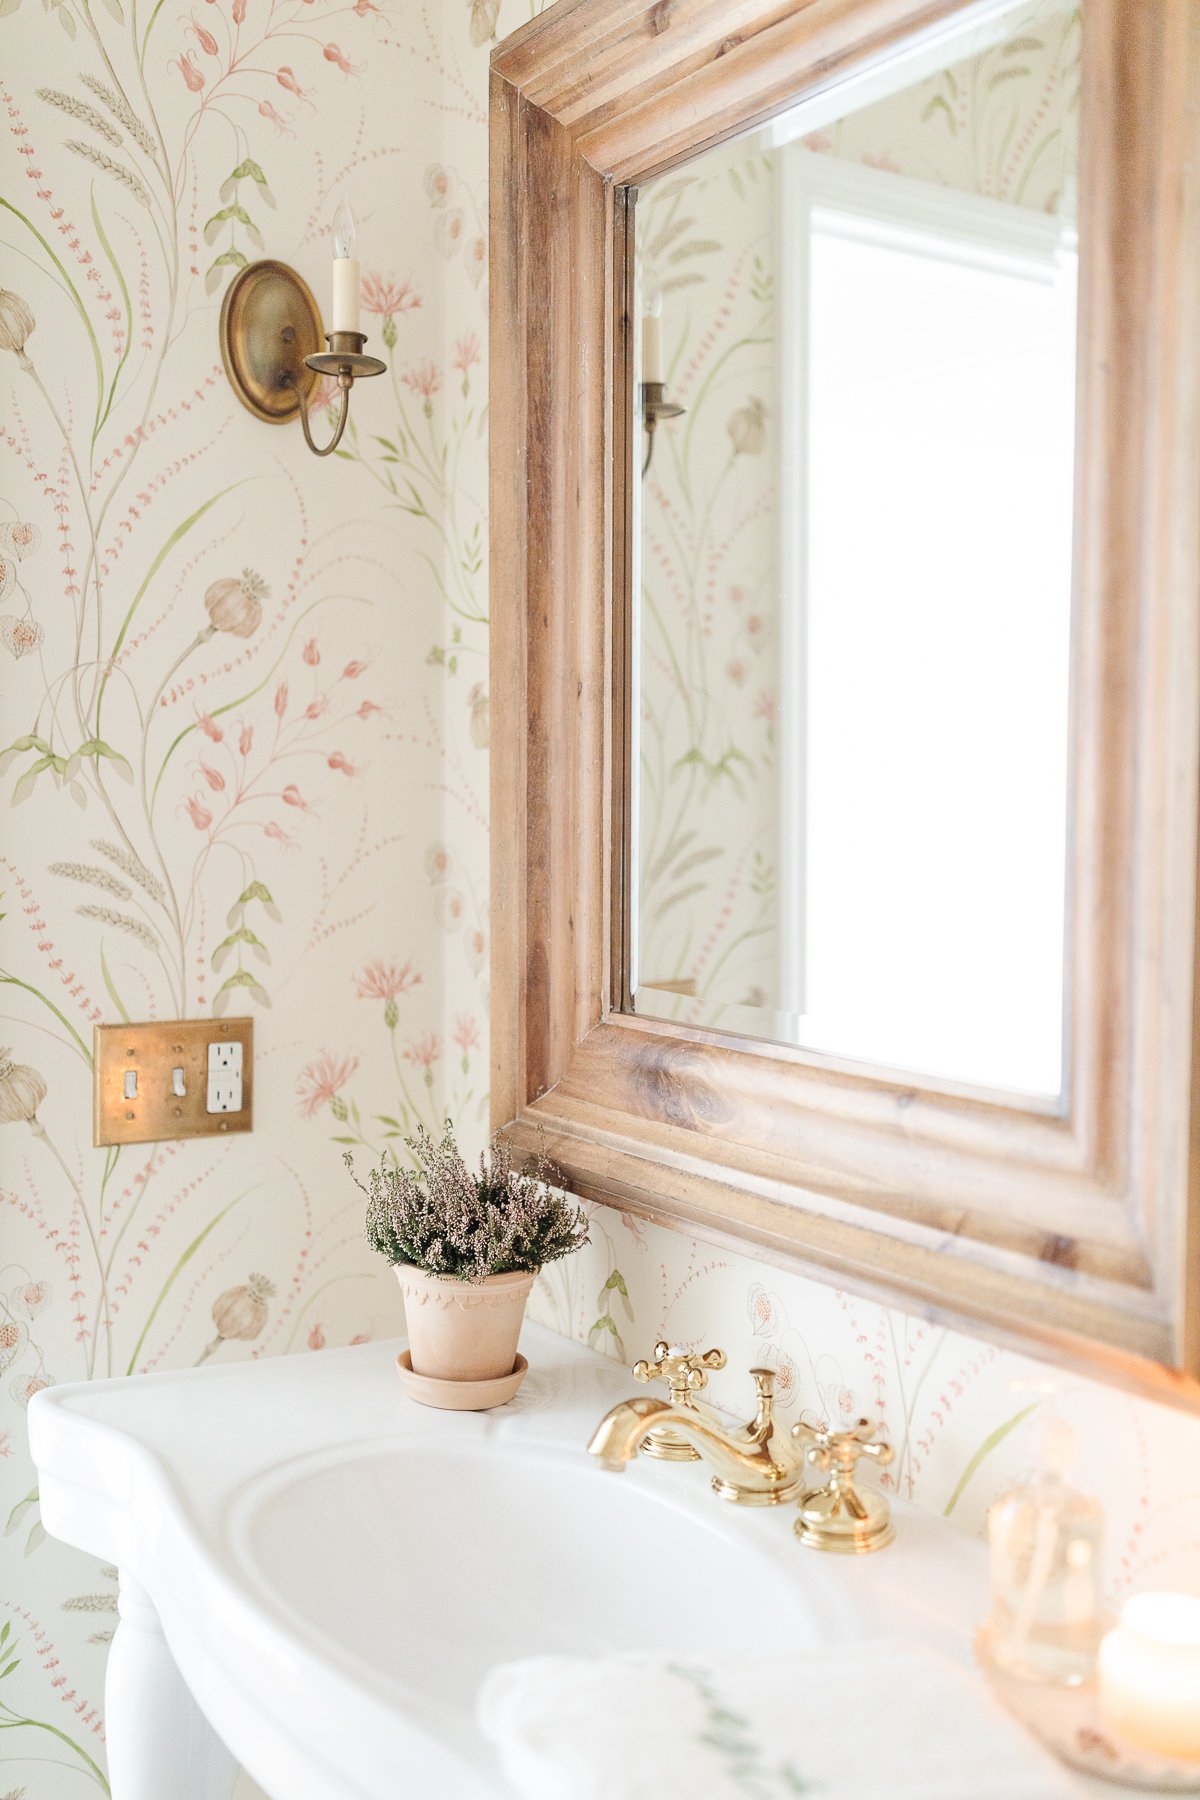 A bathroom with floral wallpaper, a mirror, and stylish brass bathroom faucets.